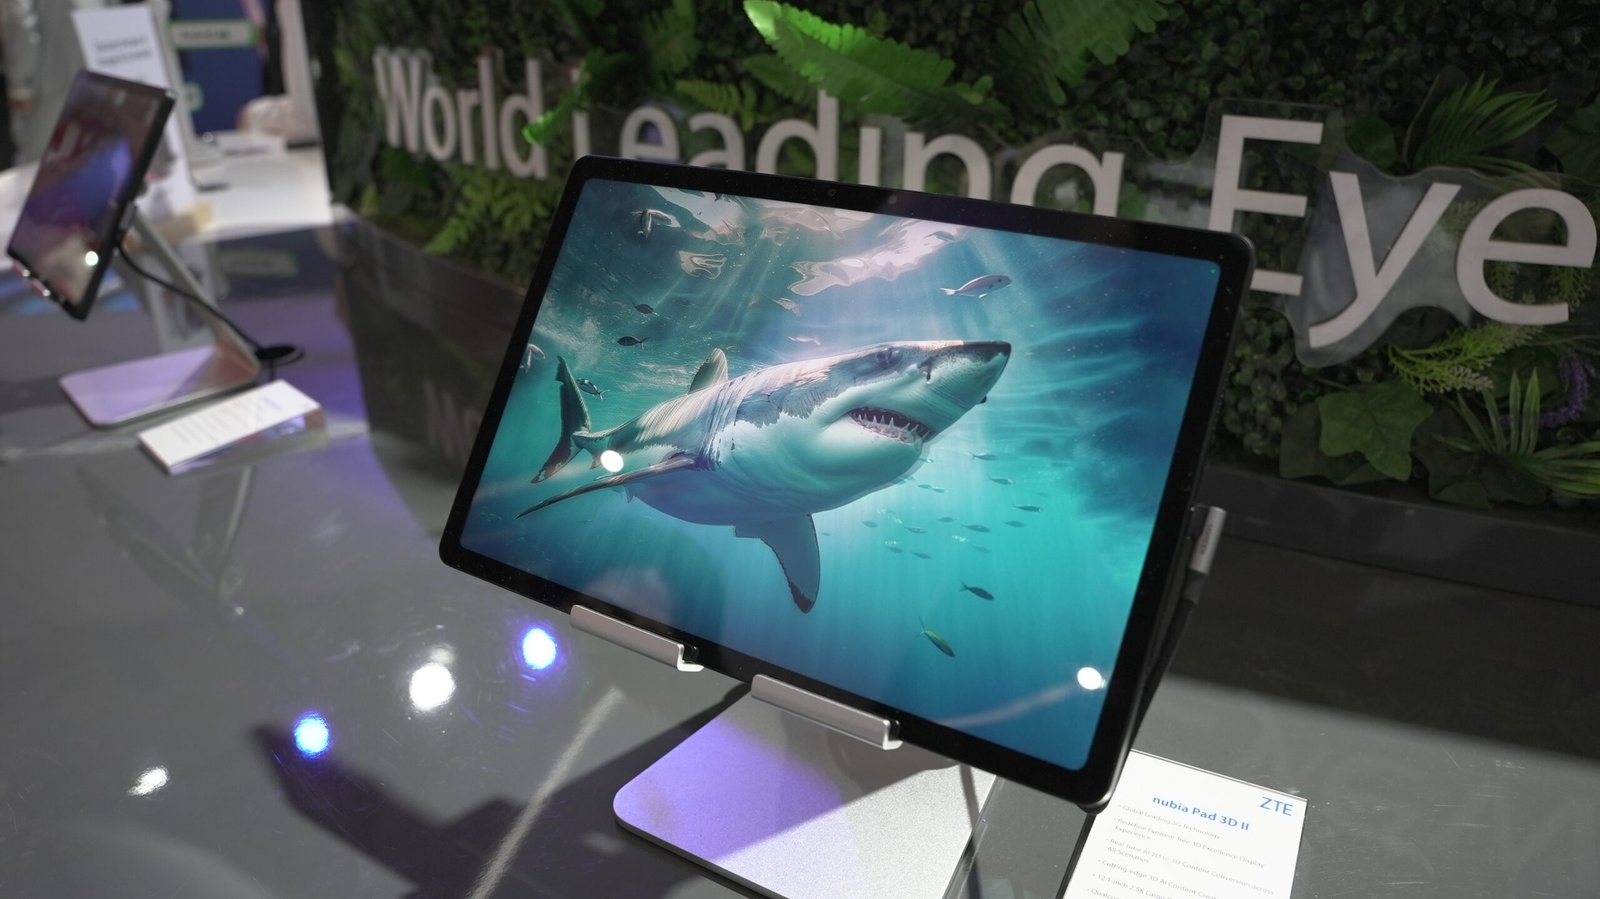 This tablet delivers a 3D experience without the hassle